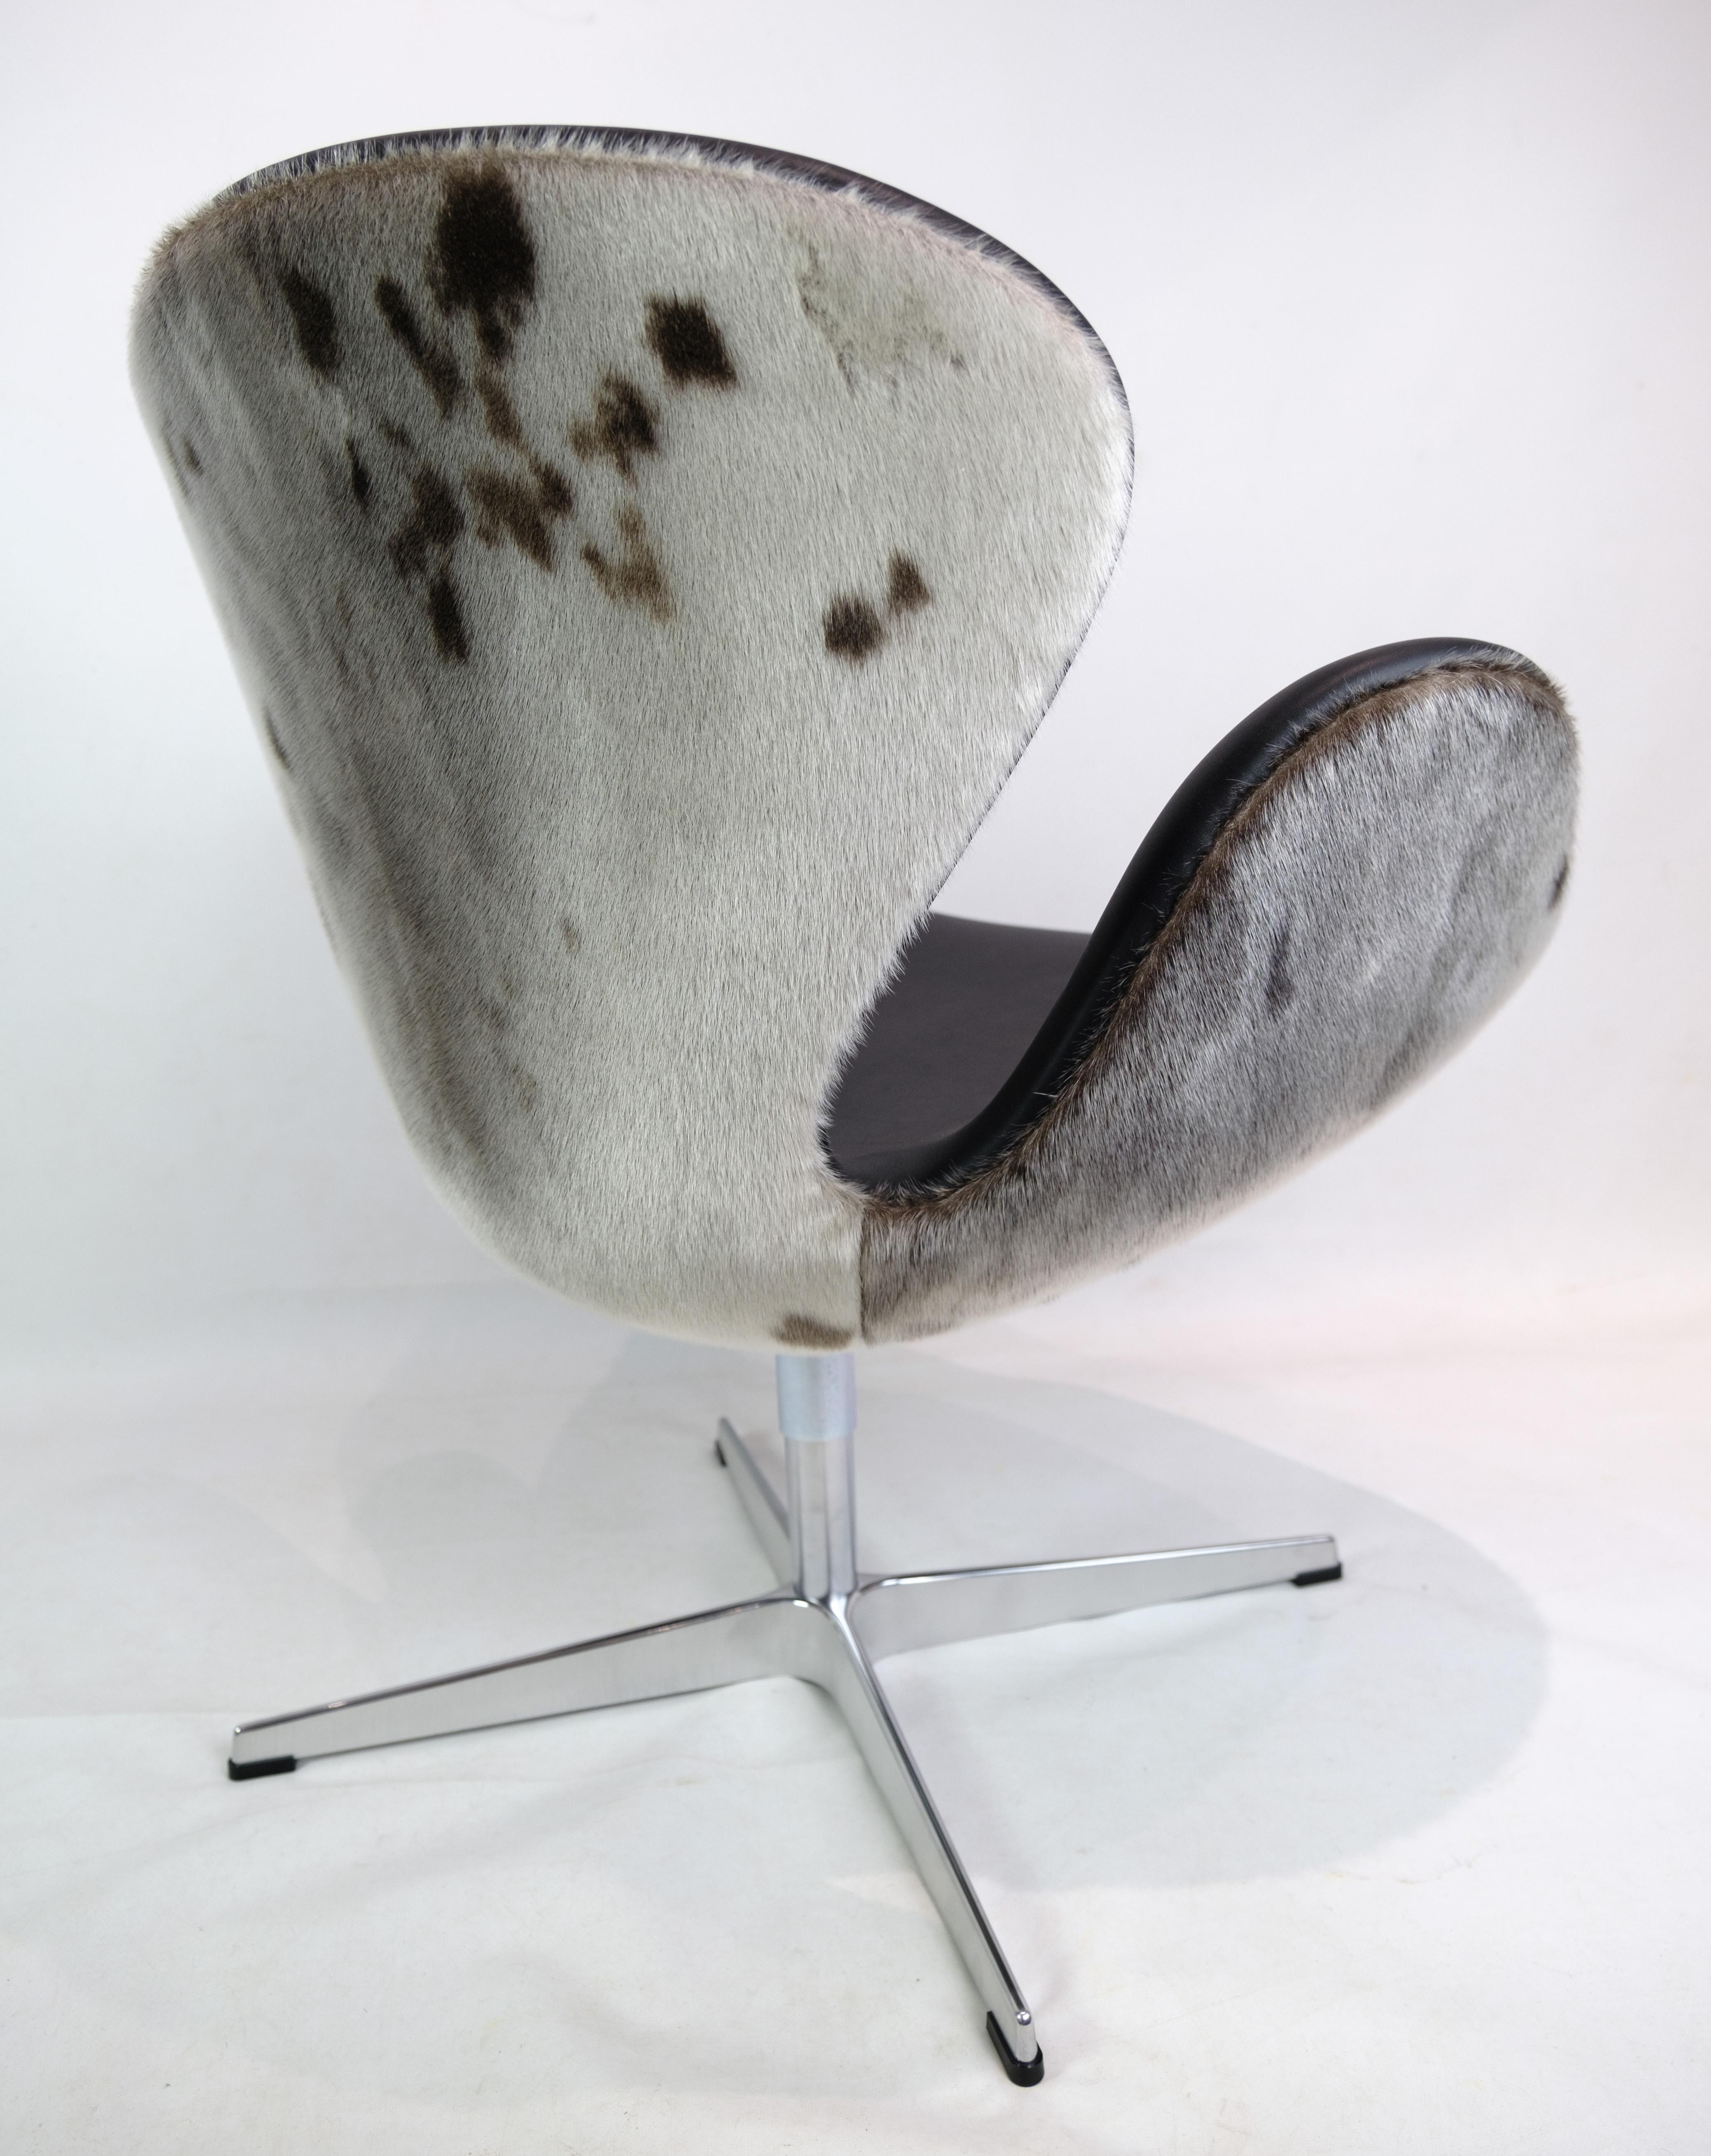 The Swan chair, Model 3320, is an iconic piece of mid-century modern design. Crafted with meticulous attention to detail, this chair was designed by Arne Jacobsen in 1958 and manufactured by Fritz Hansen. Upholstered in elegant black leather and